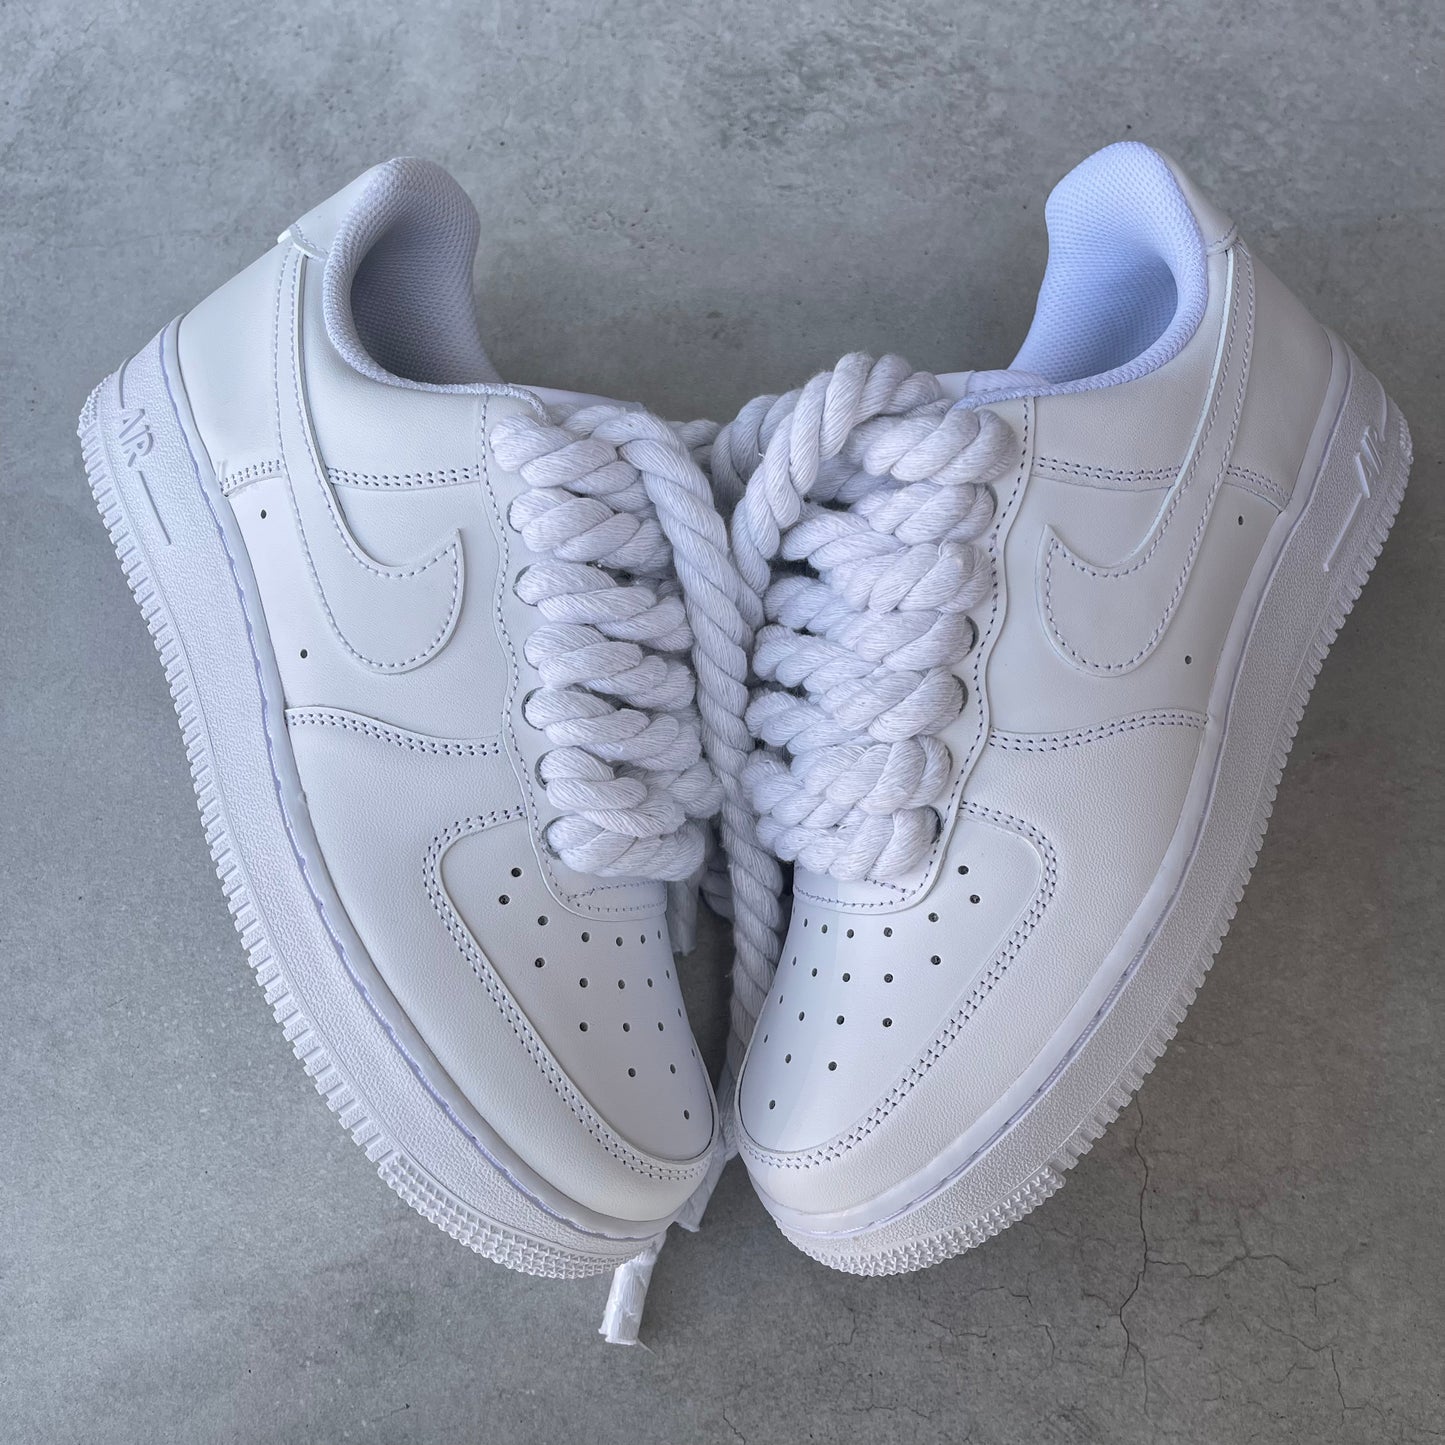 Custom AIR FORCE 1 - Rope laces (white)